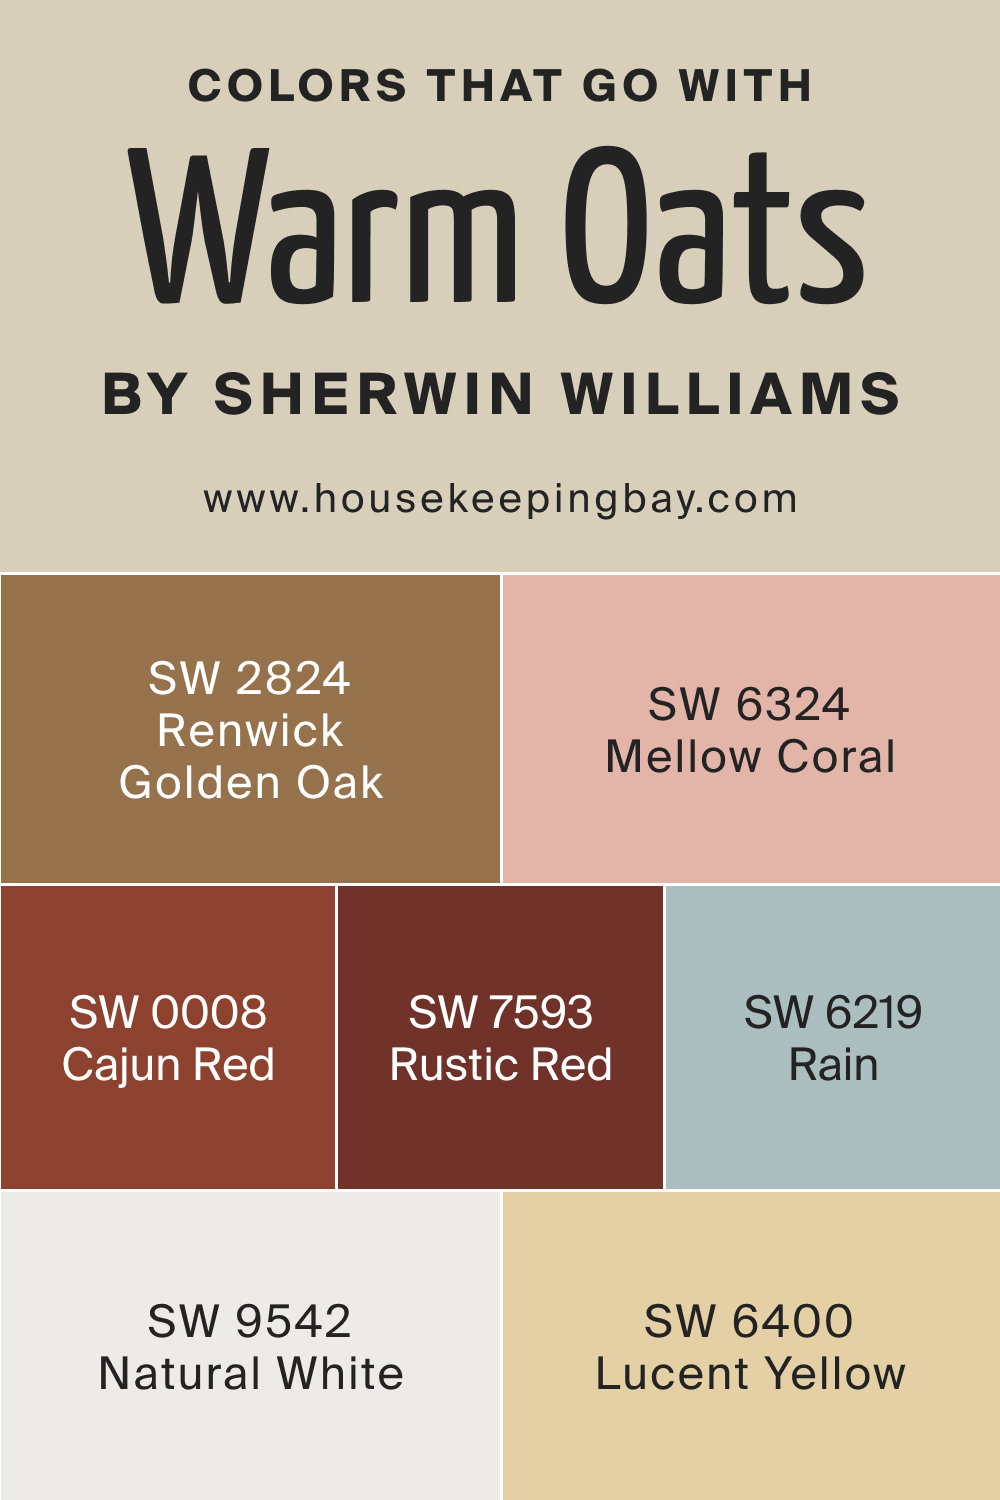 Colors that goes with SW 9511 Warm Oats by Sherwin Williams